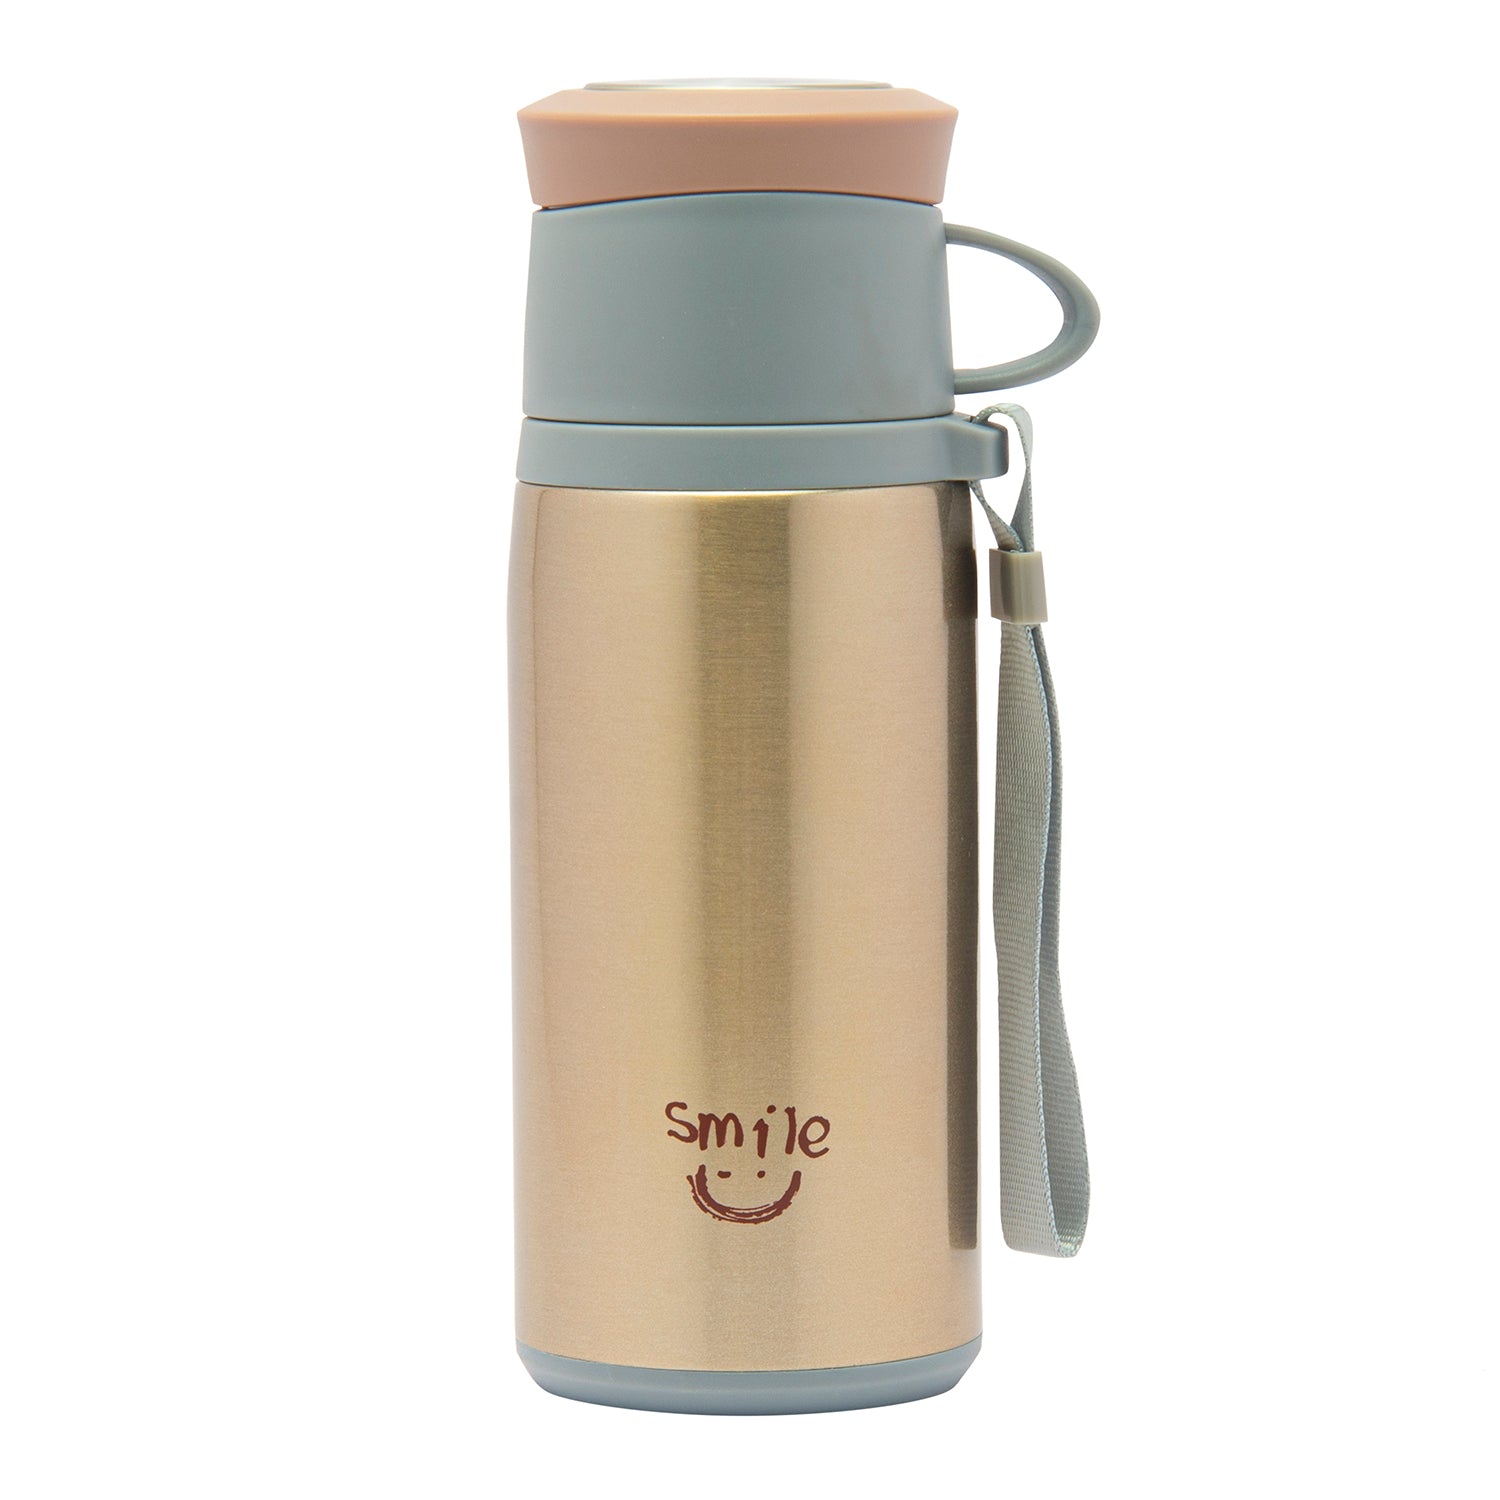 Solid Golden 350 ml Stainless Steel Flask - Baby Moo